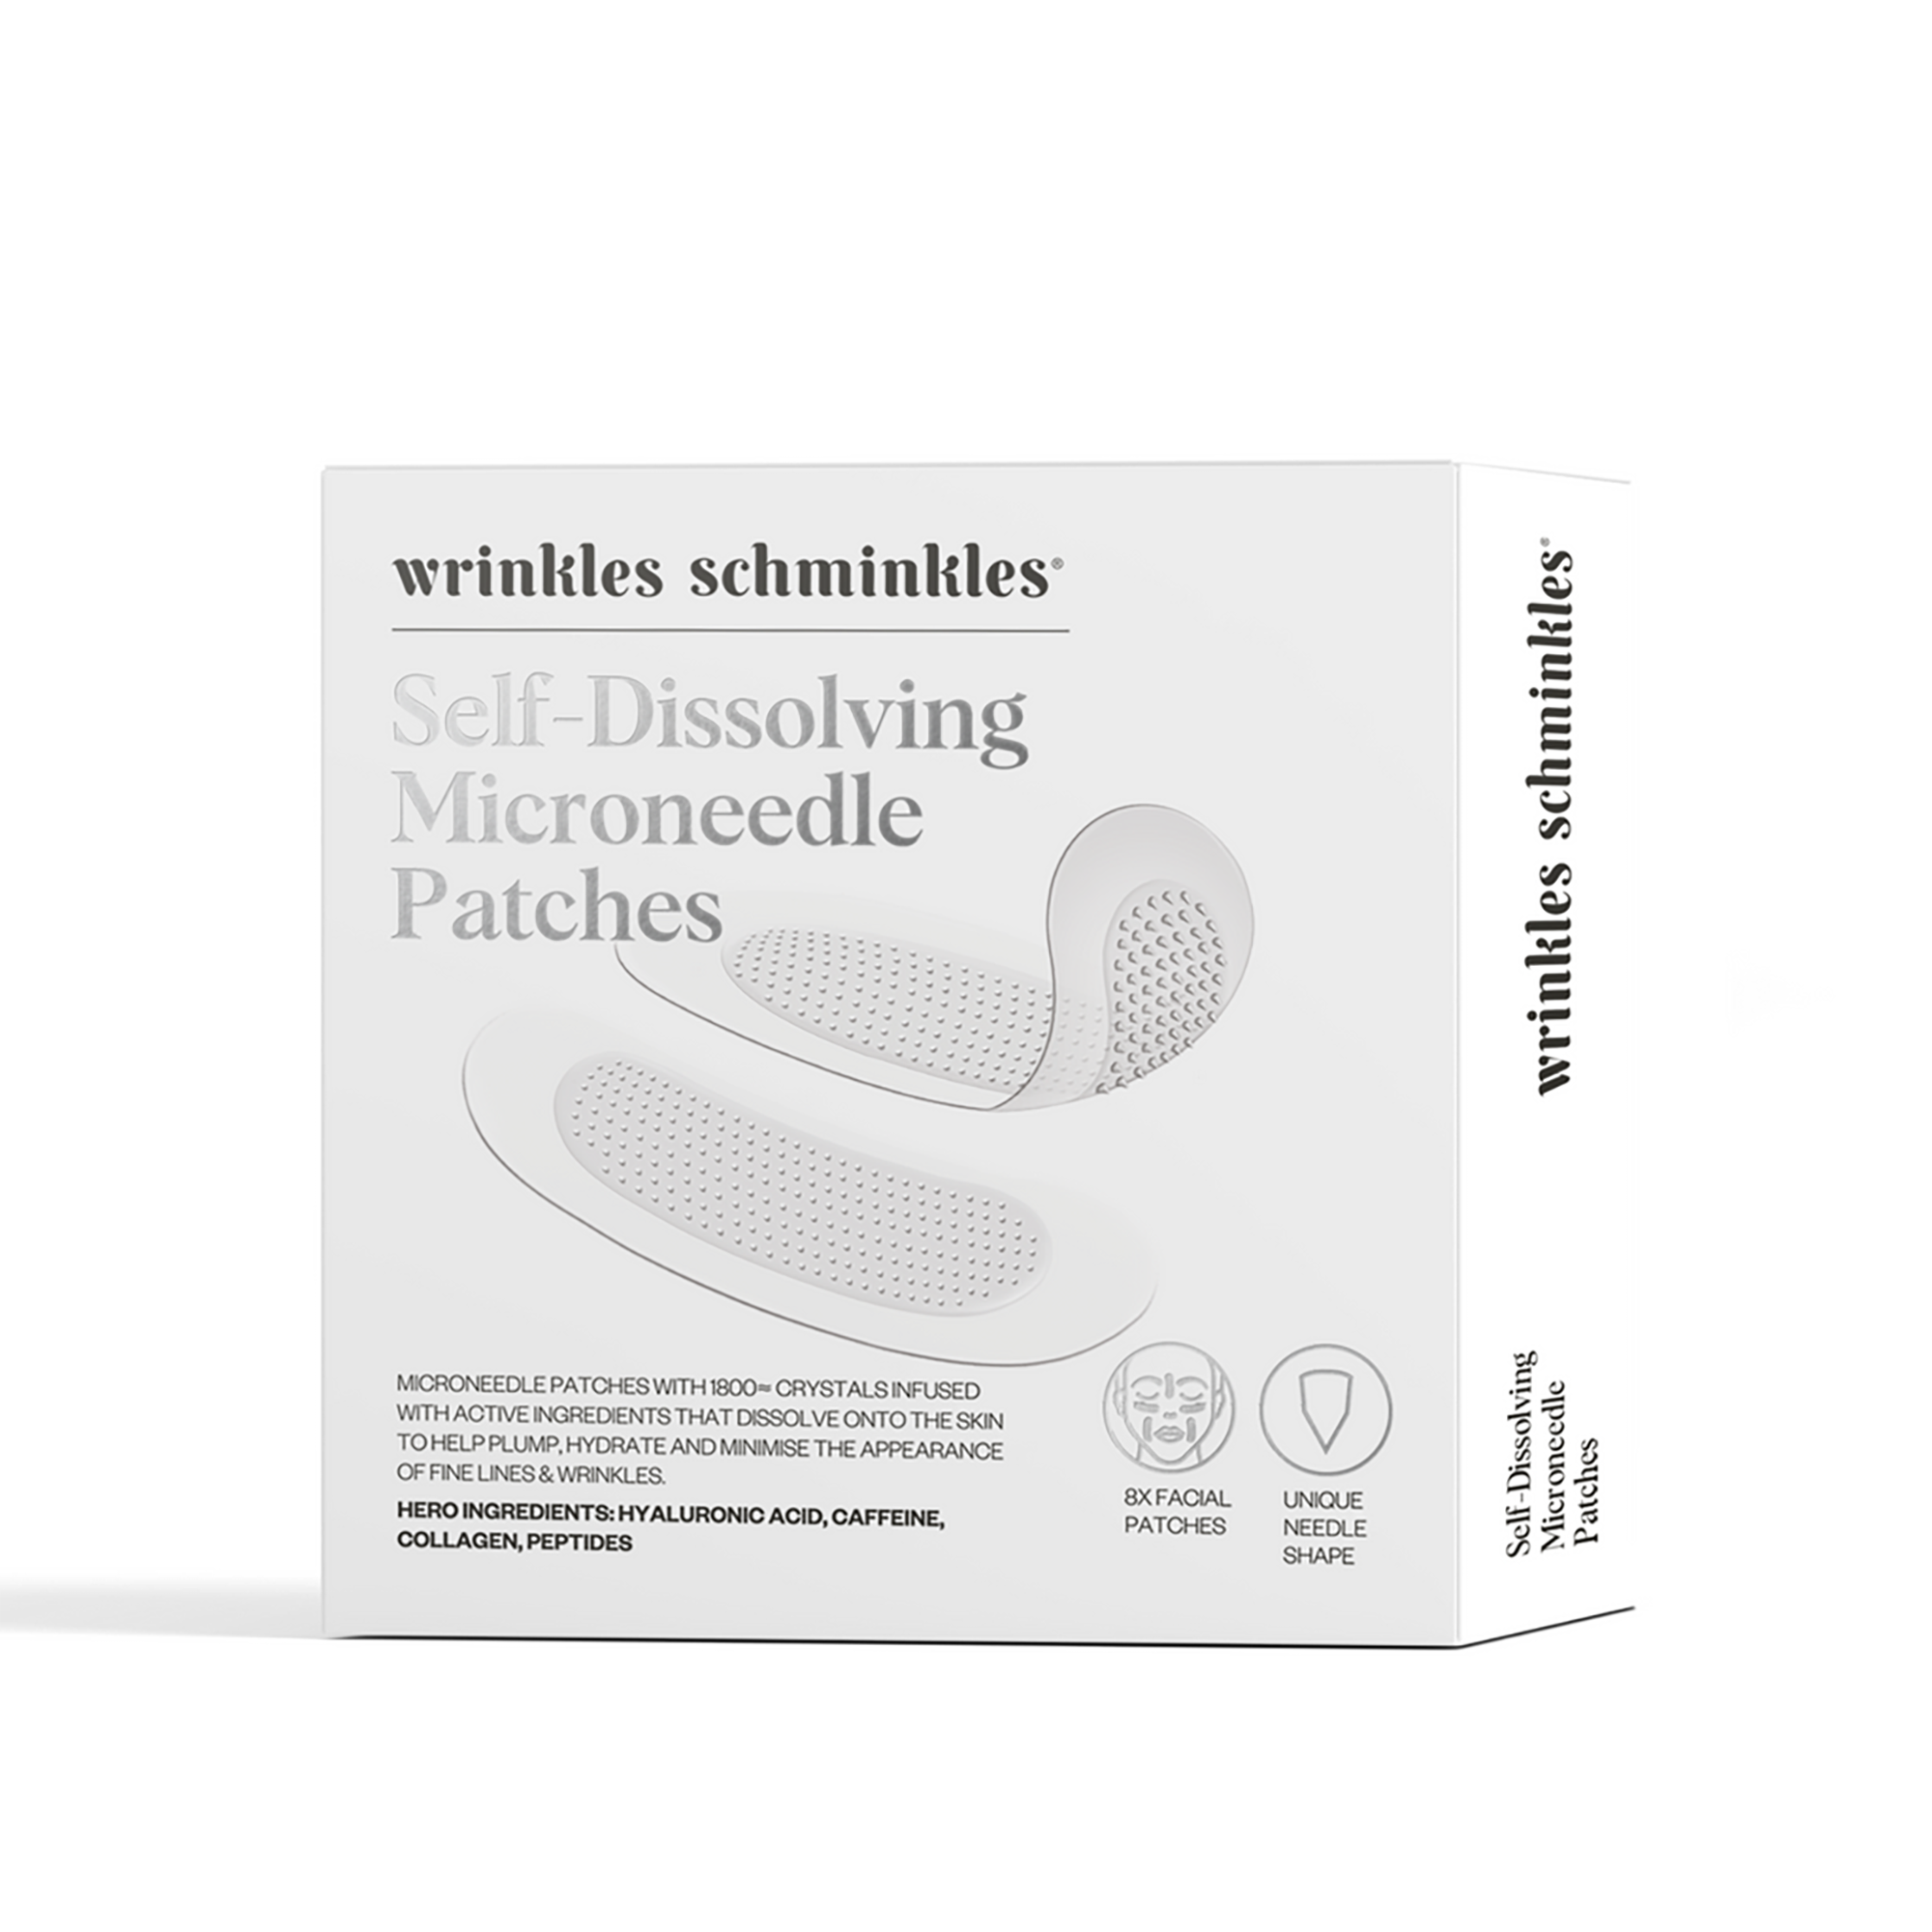 Wrinkle Schminkles Self-Dissolving Microneedle Patches - 4 Pack / 4PK